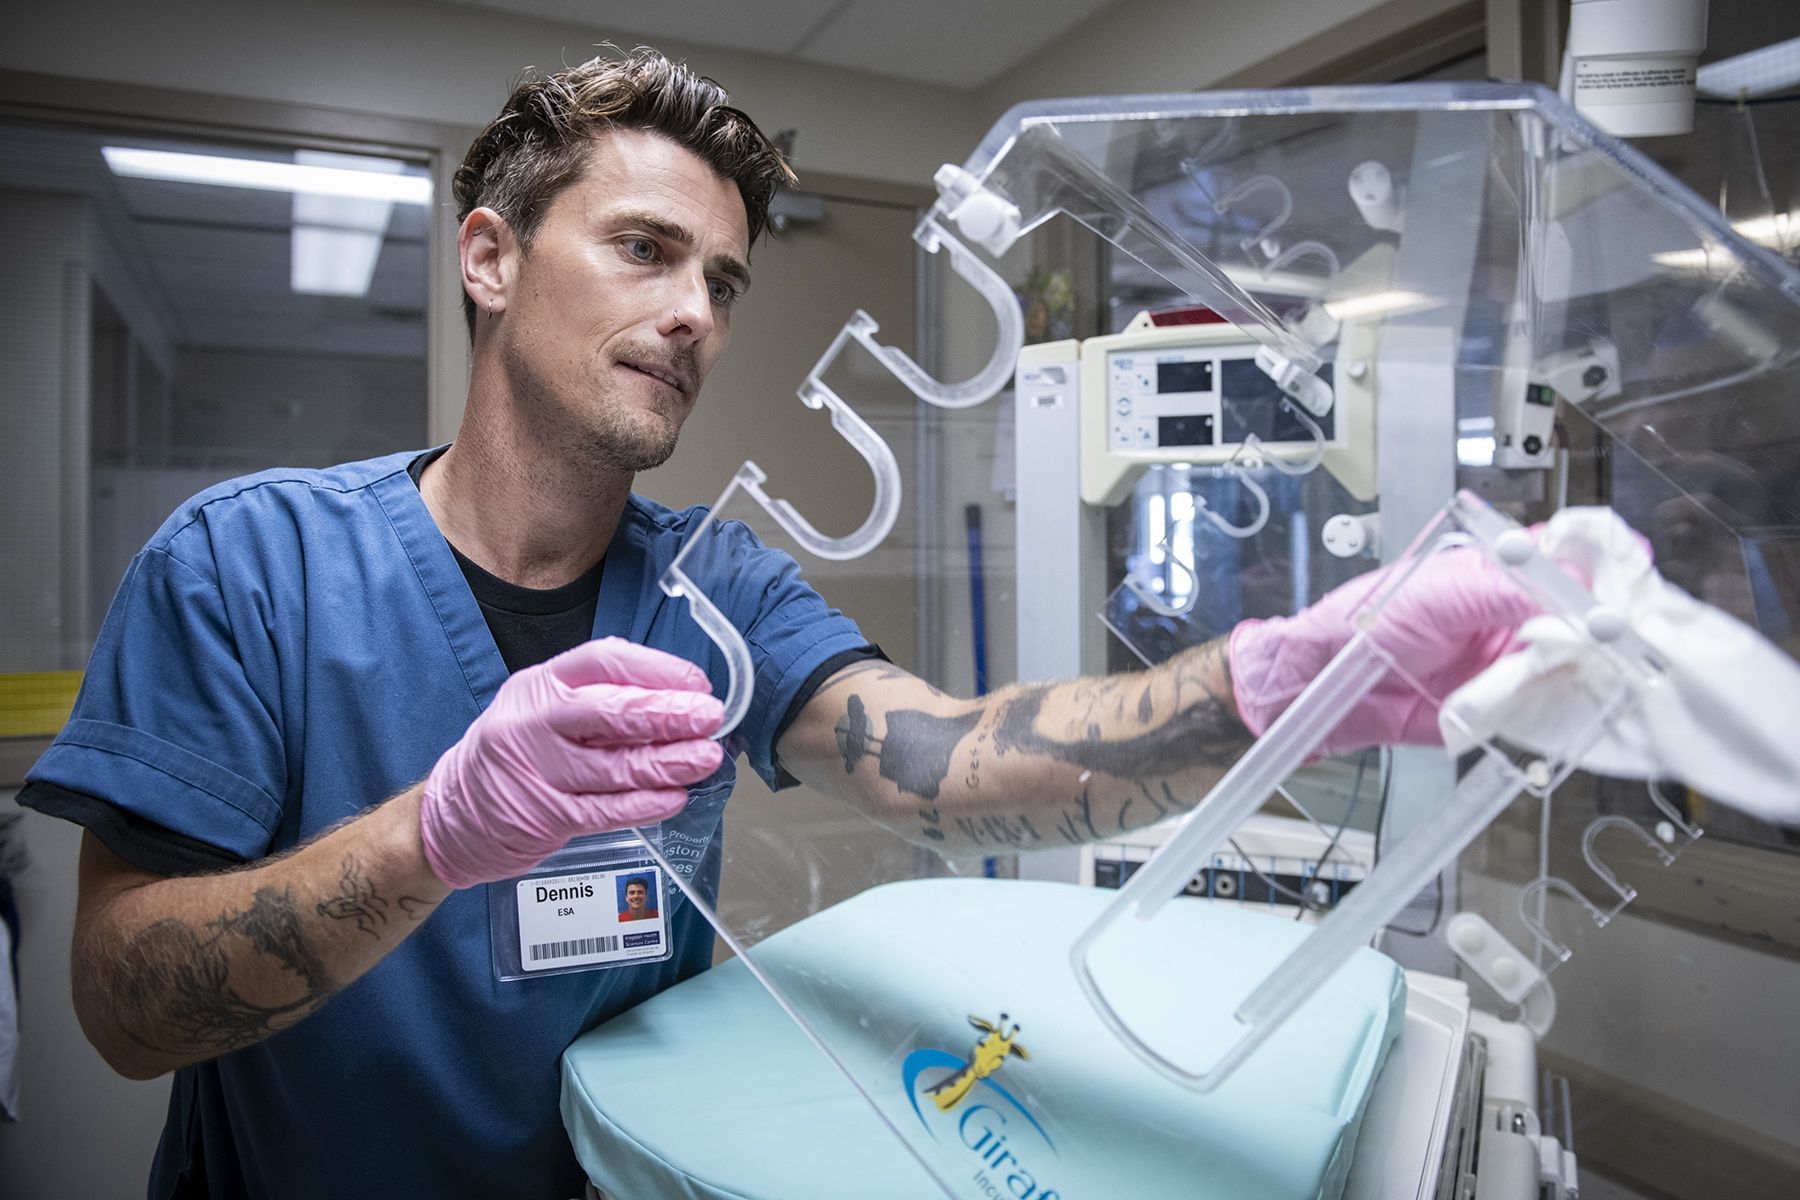 Feature image: Dennis Clark is pictured in the NICU at the KGH site, cleaning equipment. He has short brown hair, blue eyes and has tattoos on both arms. He’s wearing blue scrubs. 